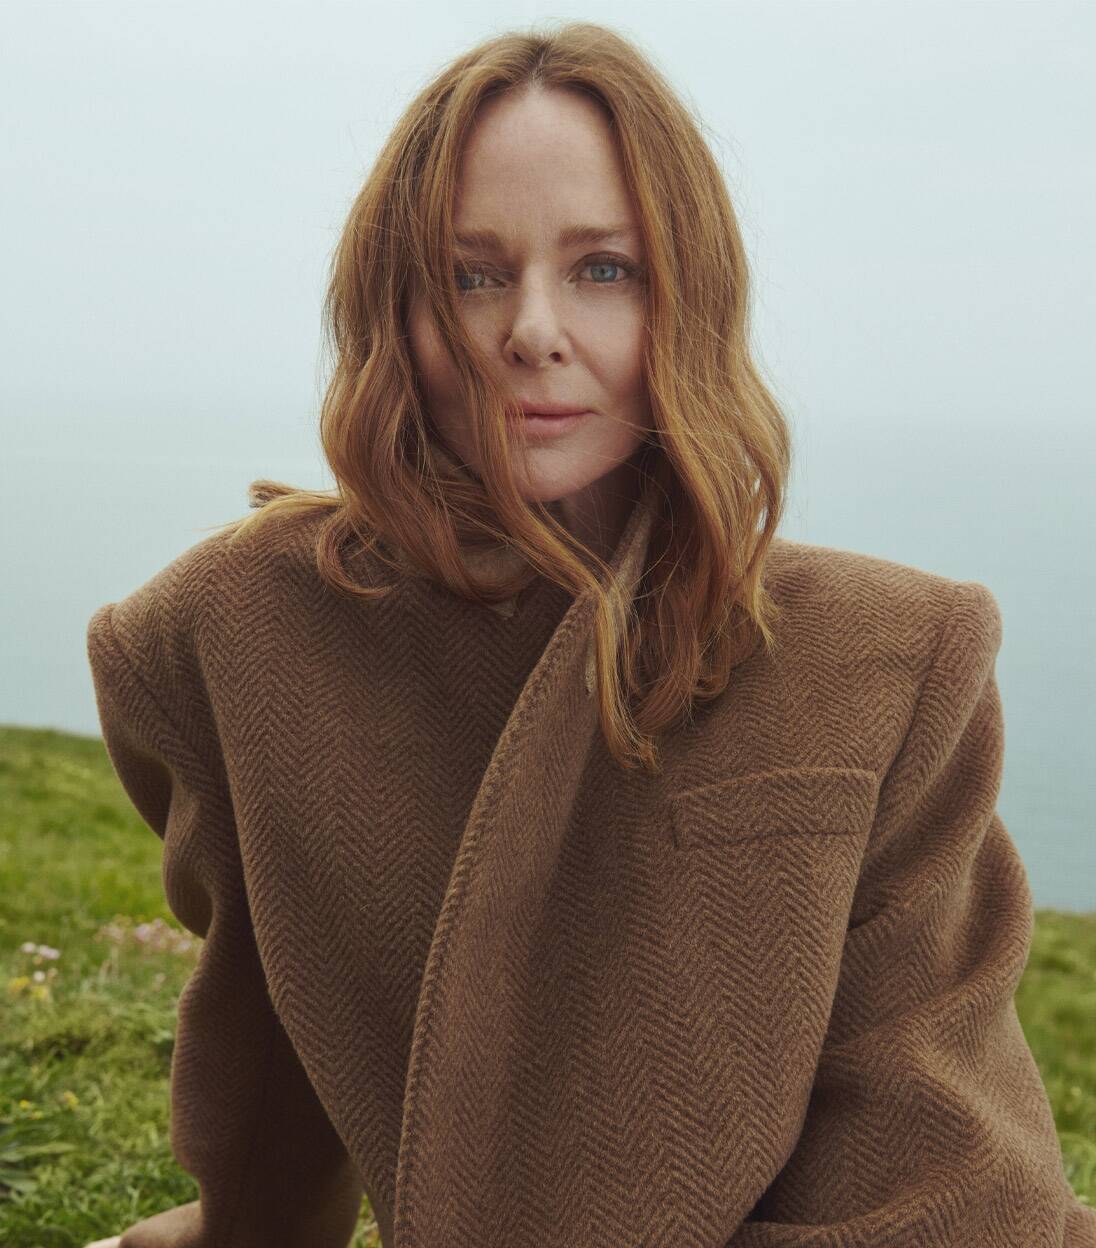 Stella McCartney Signs With LVMH-owned Thélios for Eyewear